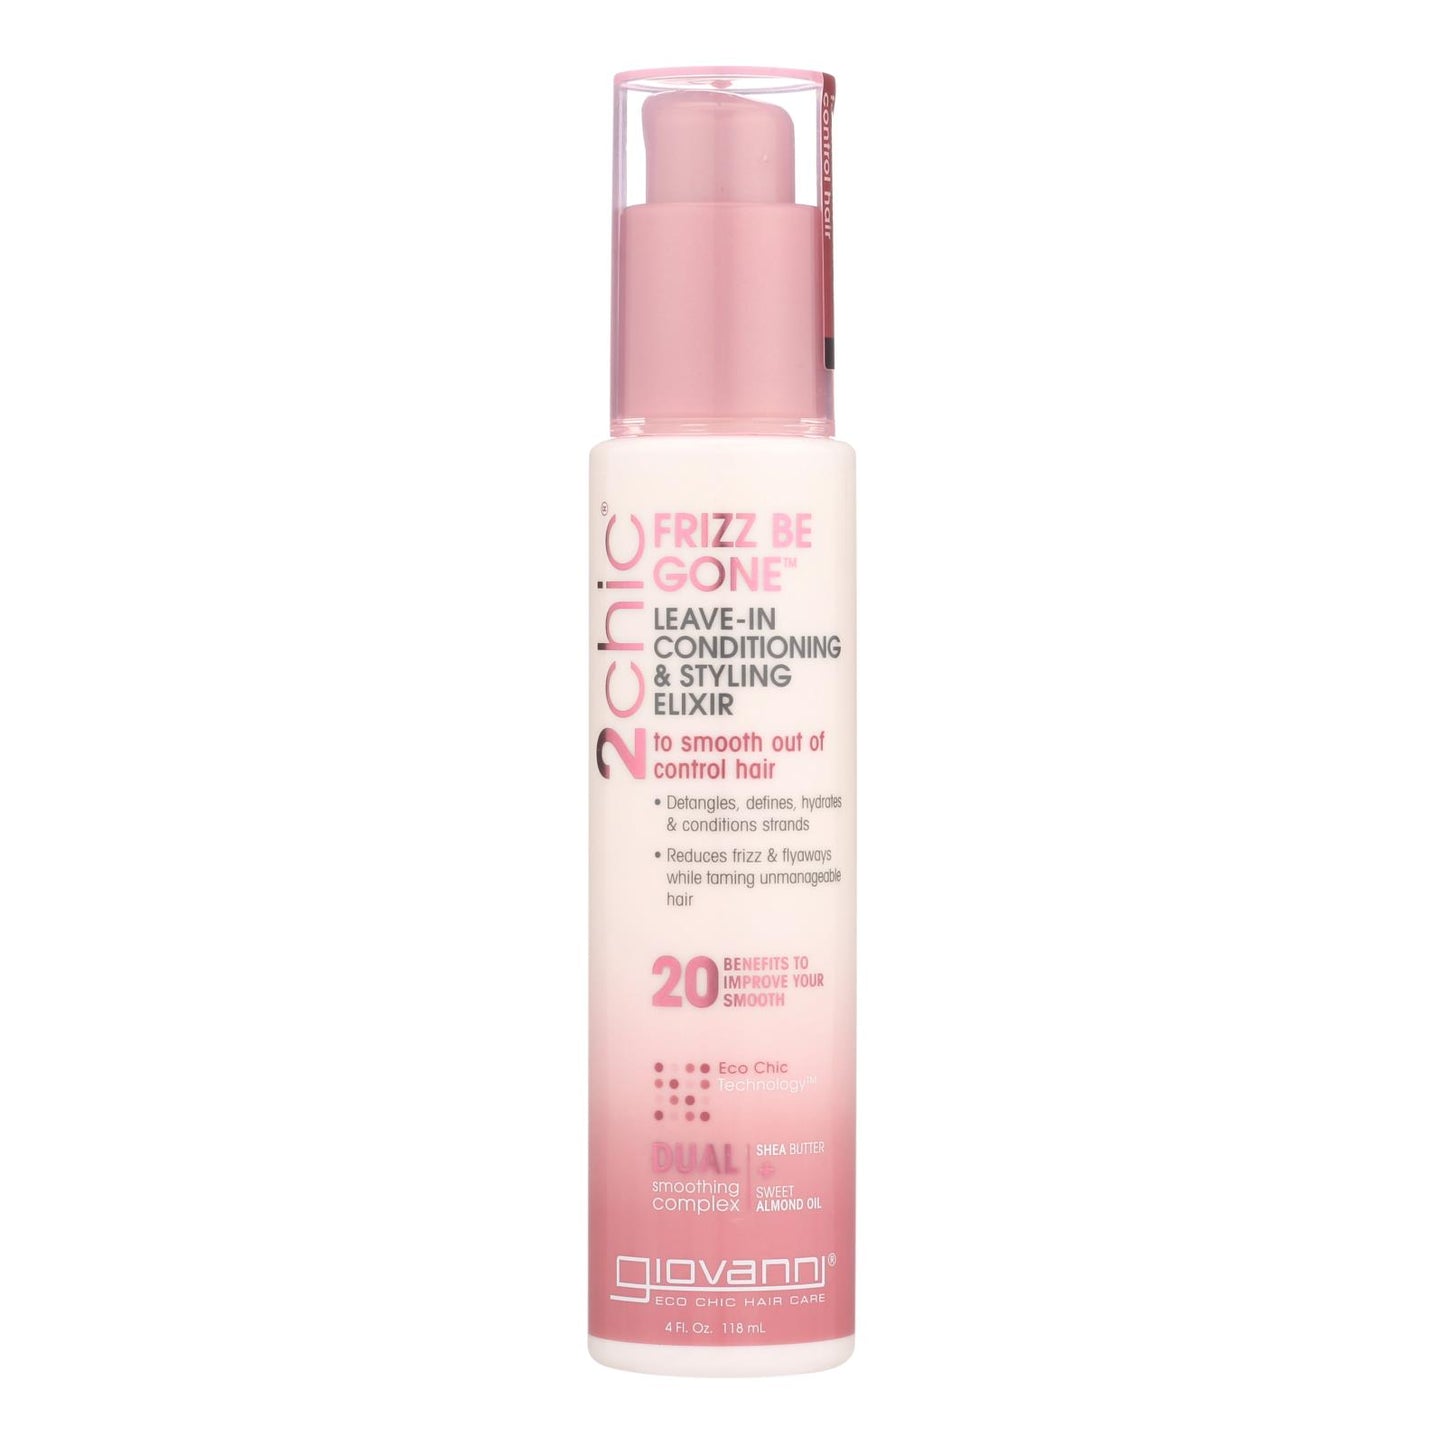 
                  
                    Giovanni 2chic Frizz Be Gone Leave-In Conditioning & Styling Elixir - 4 fl oz.
                  
                